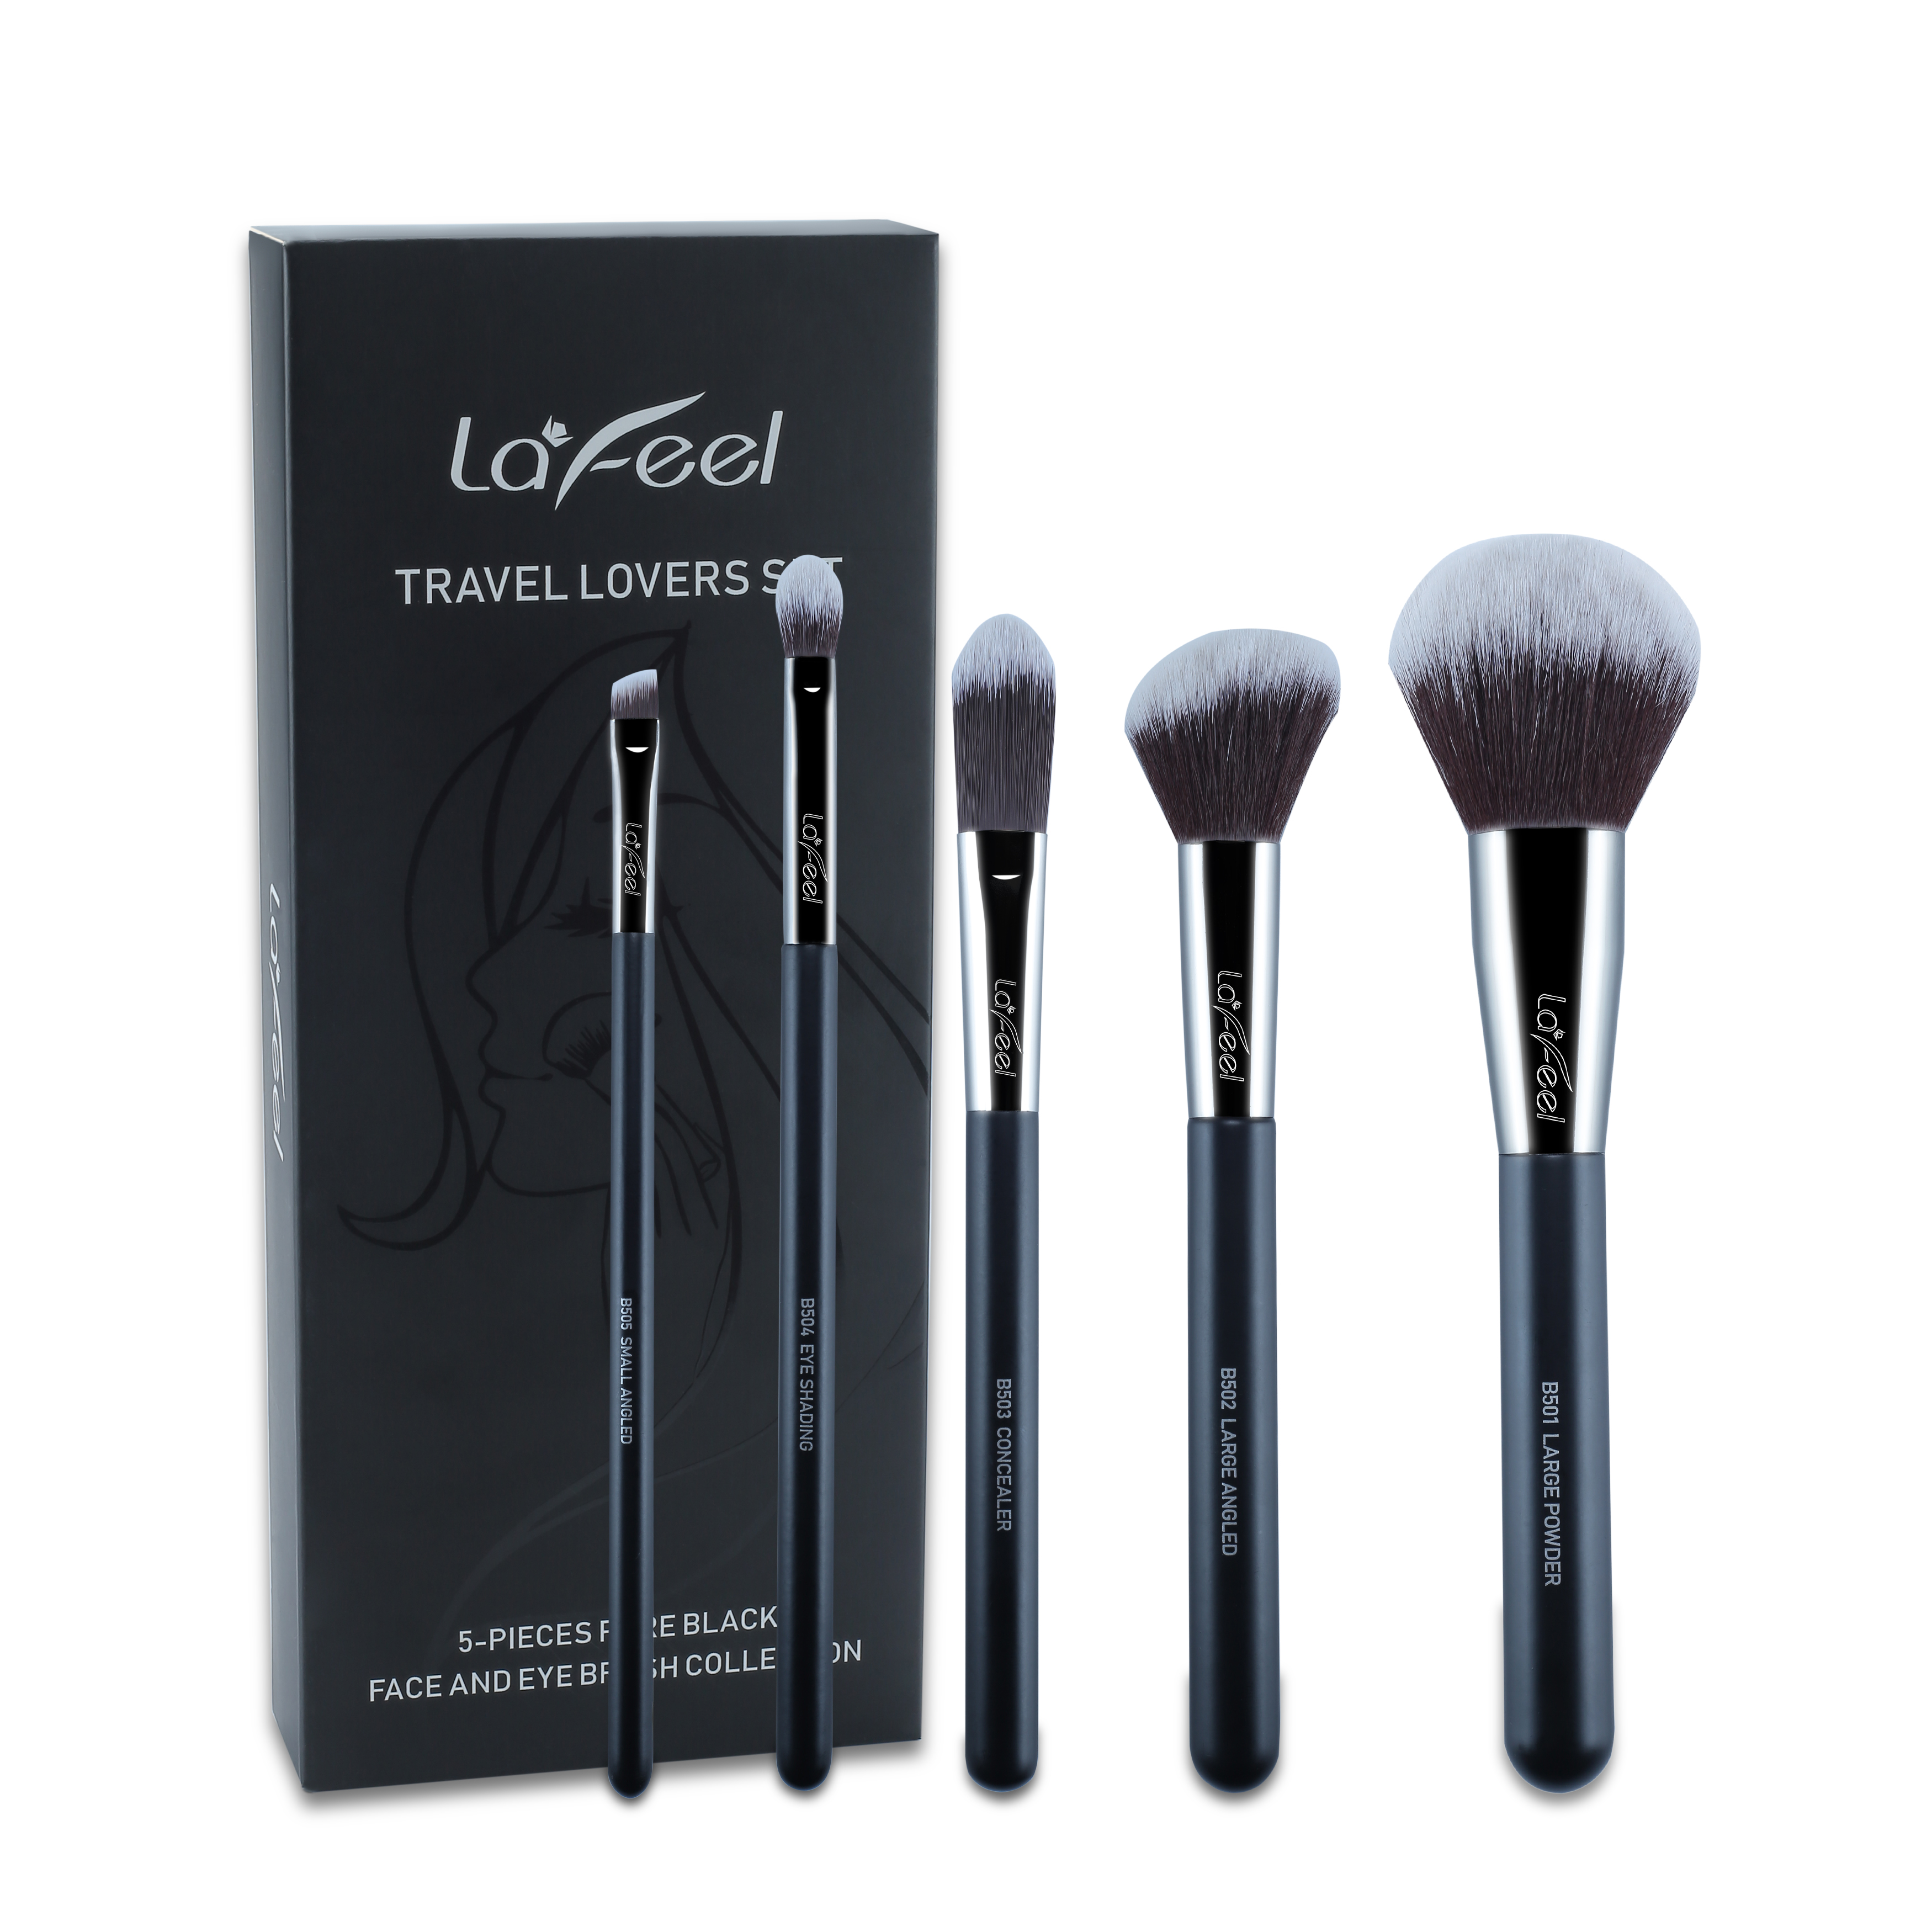 PURE BLACK COLLECTION TRAVEL LOVERS SET - image 1 of 5